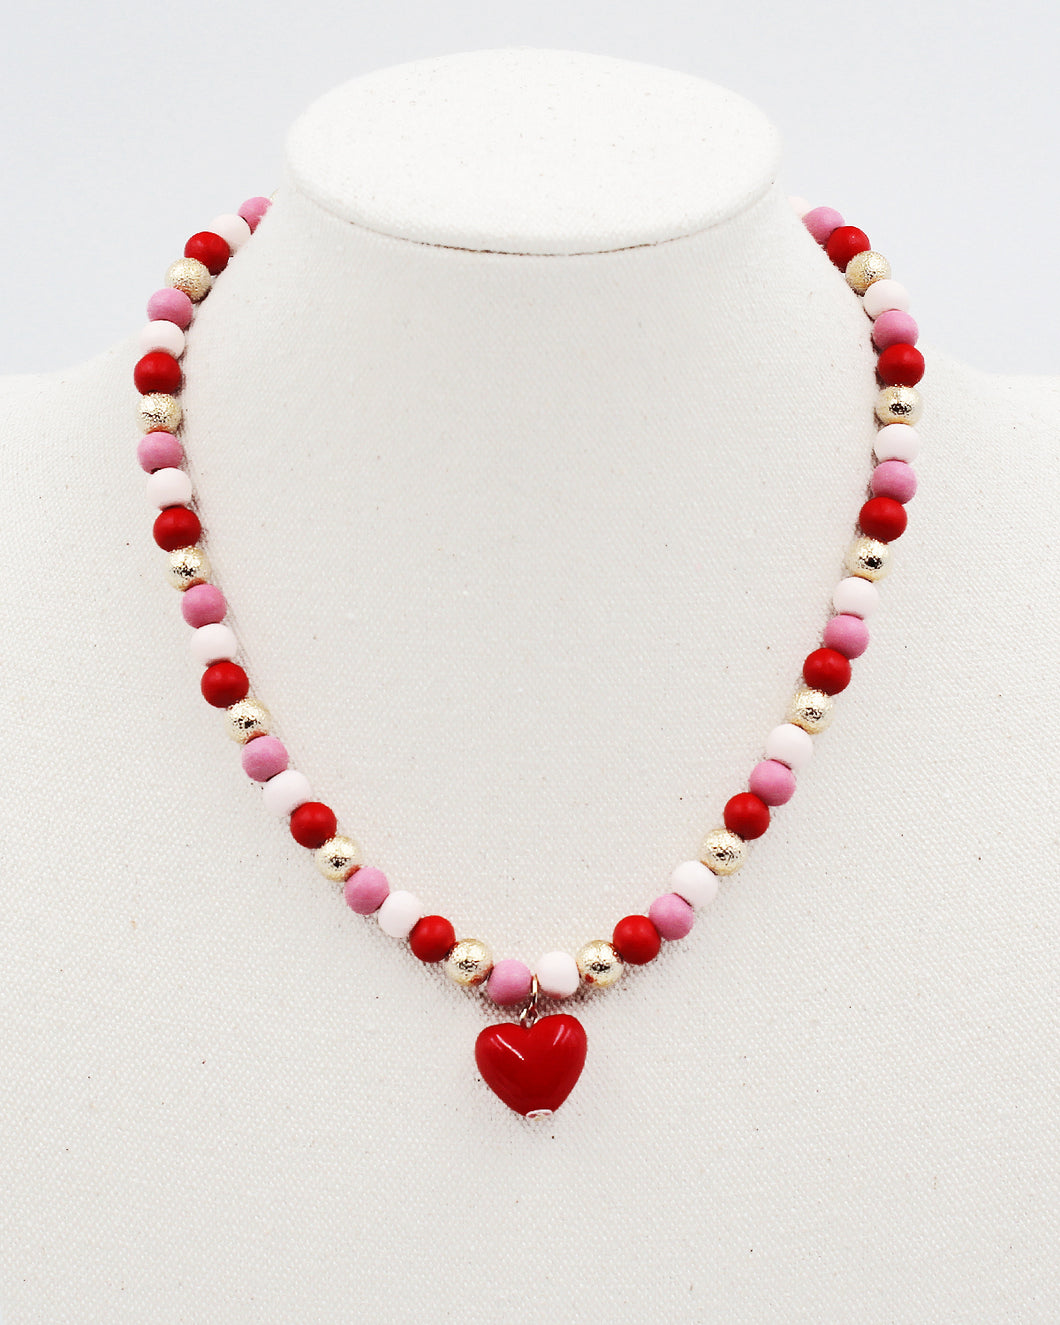 Painted Wooden Beaded Chain with Heart Charm